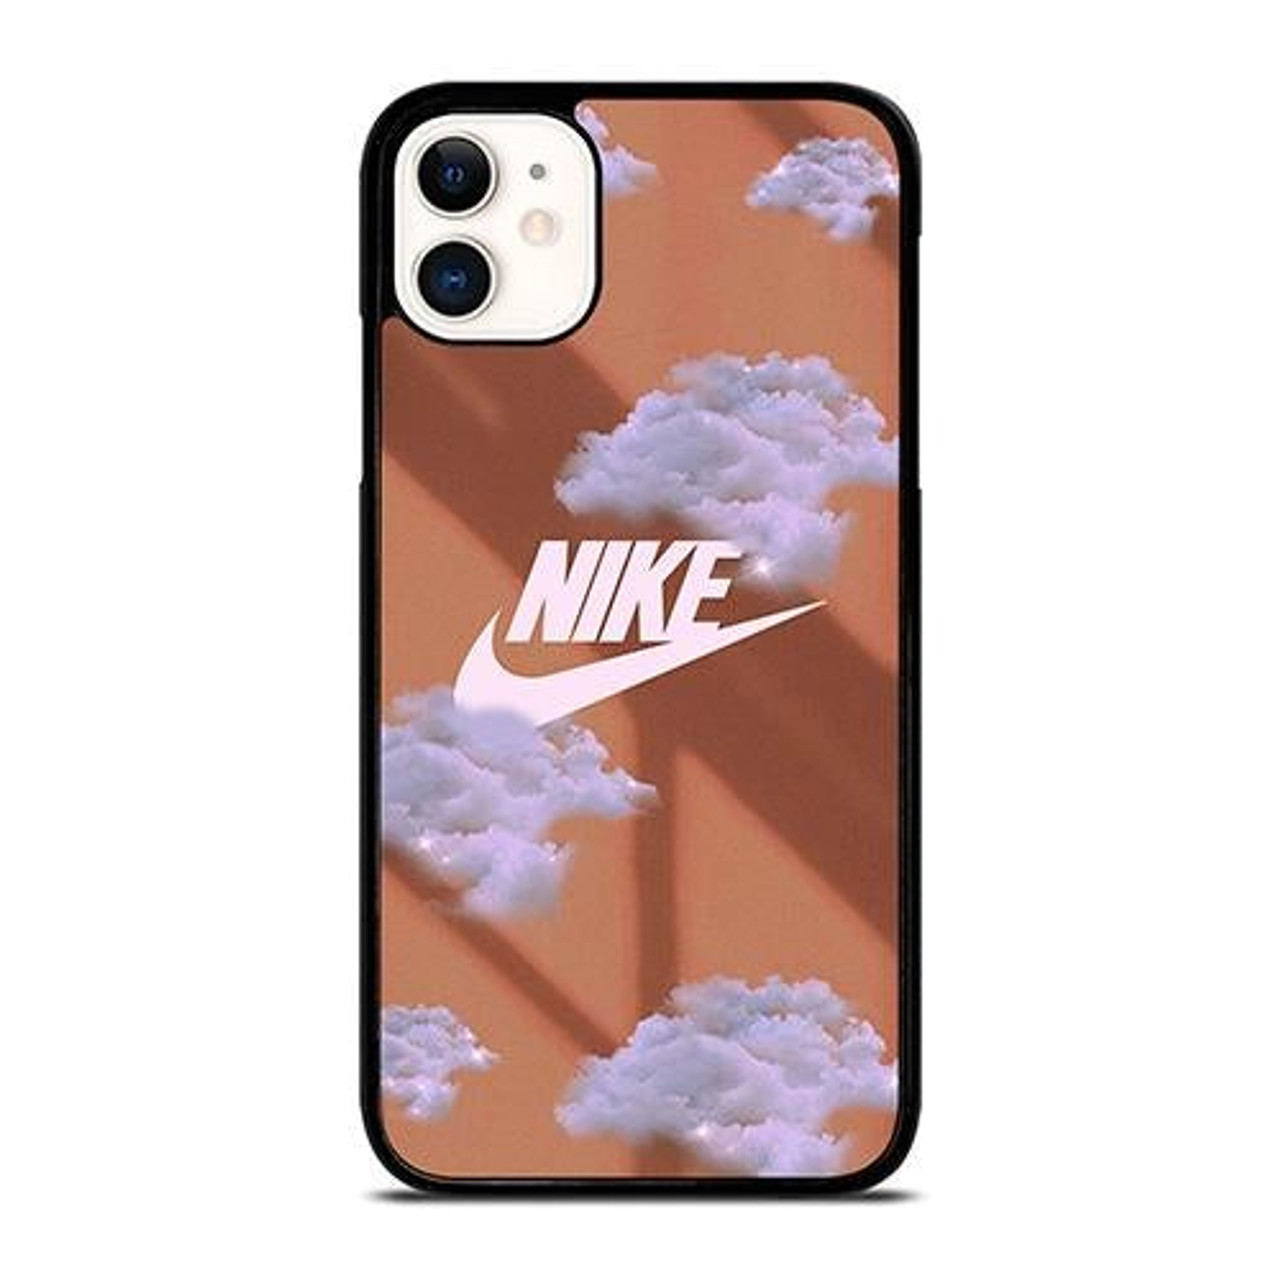 NIKE AESTHETIC CLOUD iPhone 11 Case Cover